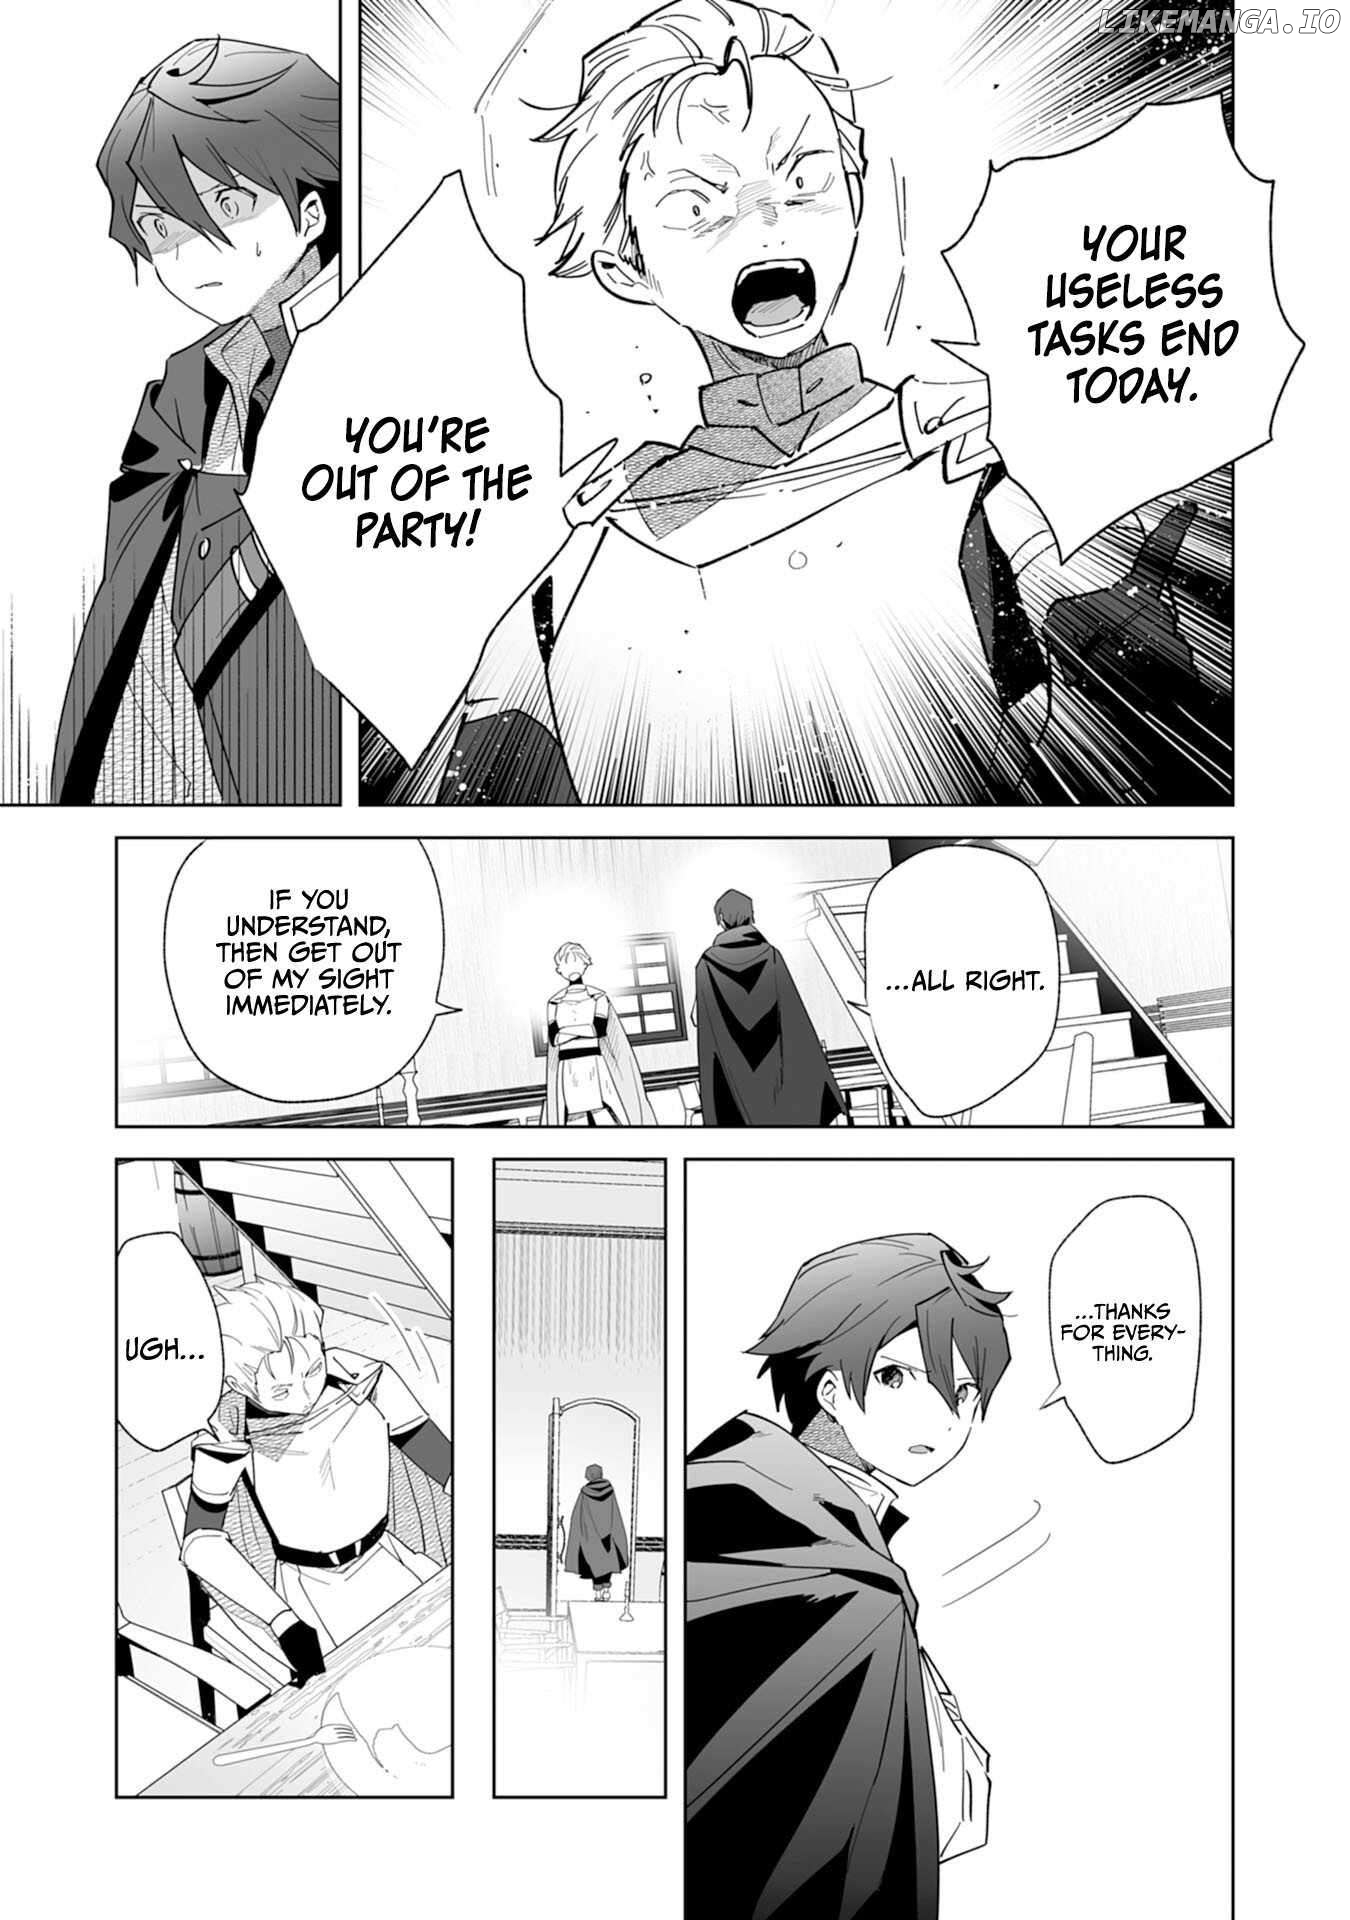 The ex-janitor who was expelled, became known as the "greatest repairman" with his exceptional skills - Requests from SSS rank parties and royalty don't stop coming Chapter 1 - page 7